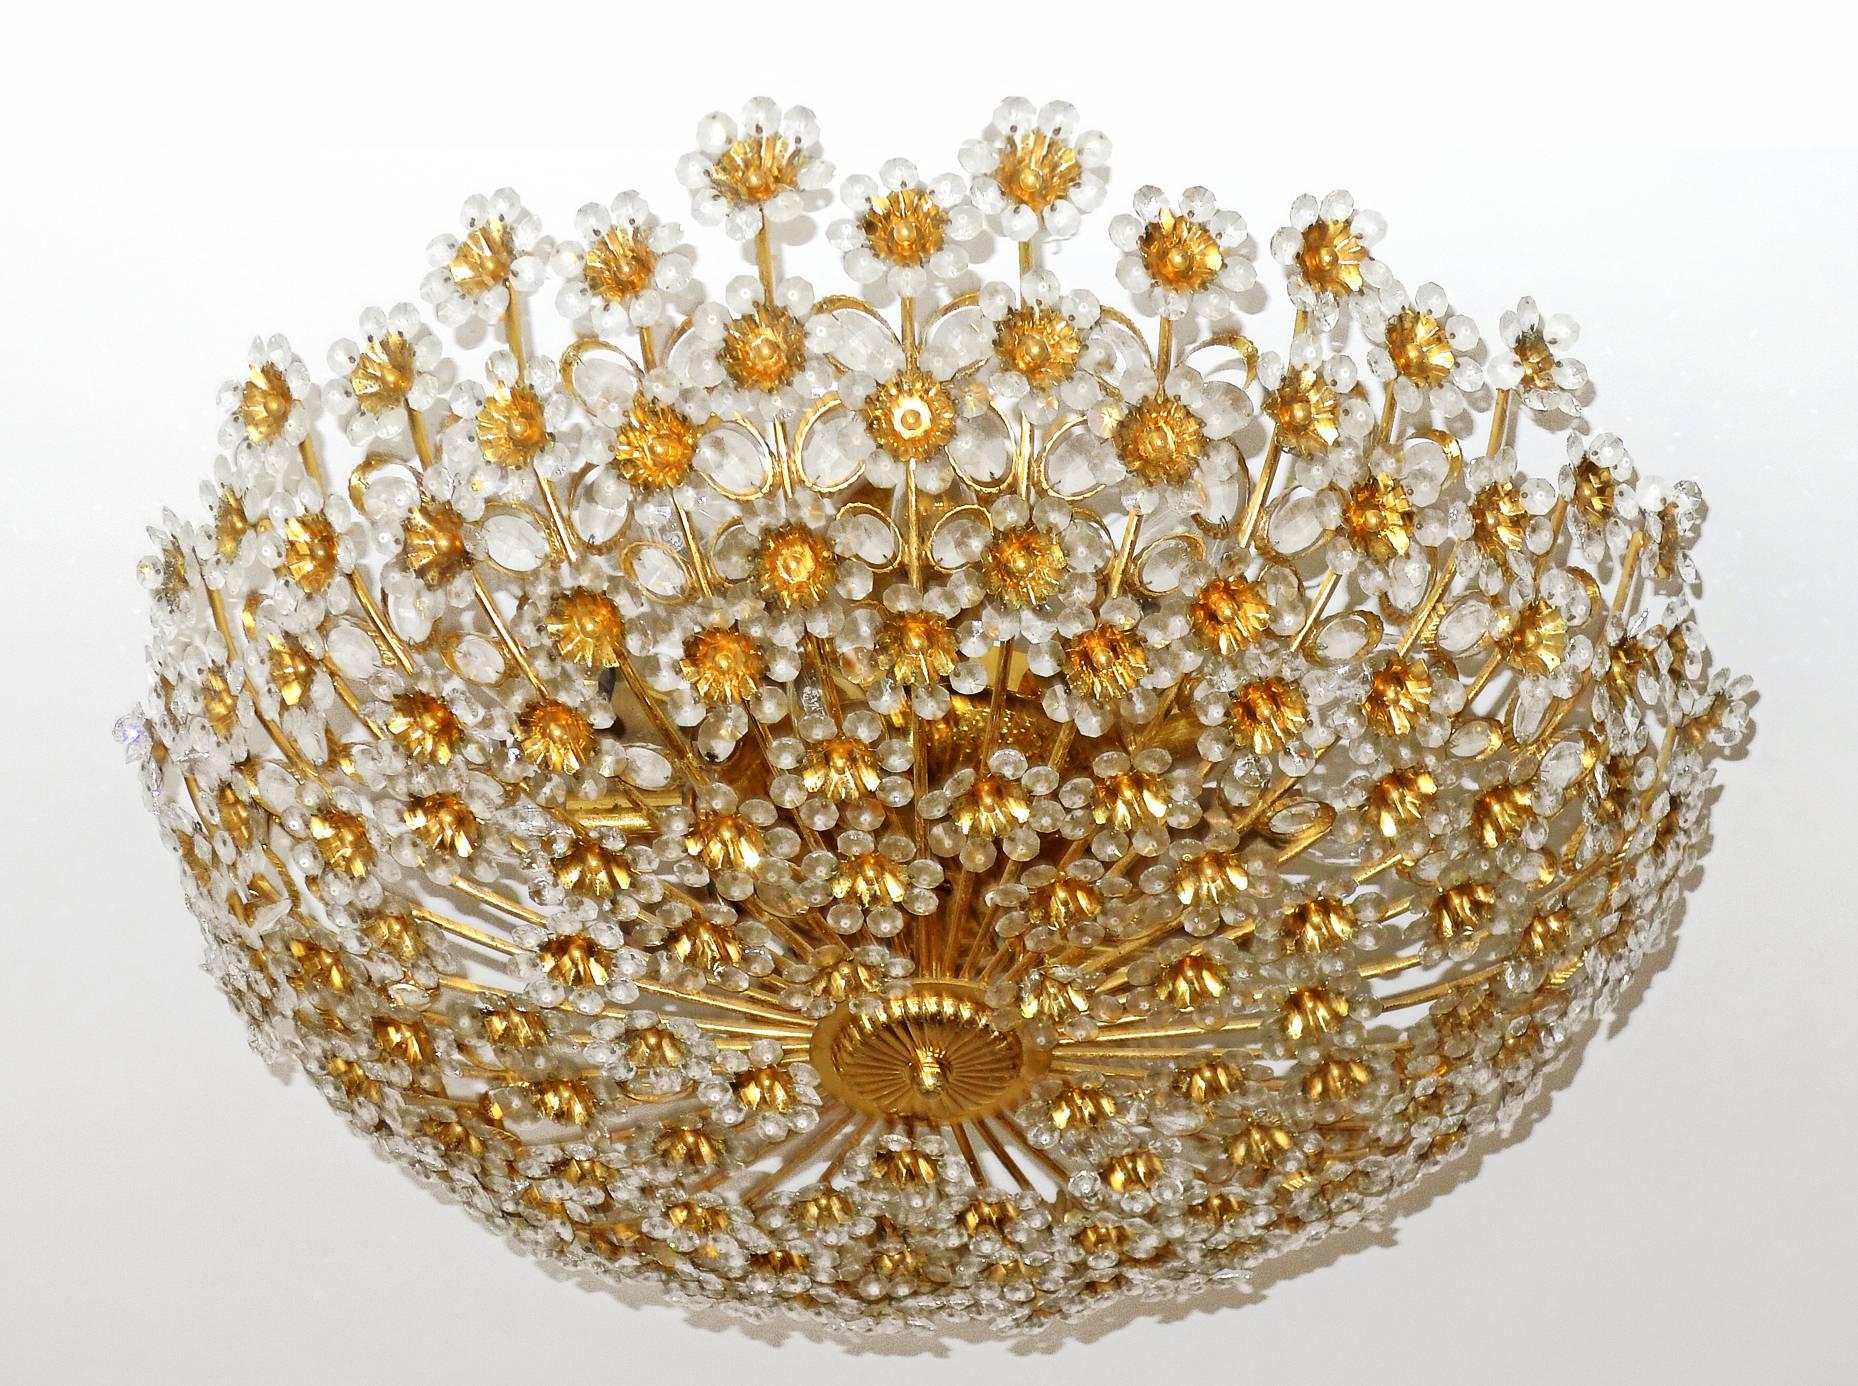 Stunning gigantic high quality luxury gold-plated brass chandelier. Very shiny with fabulous mirror effect and sparkling countless beautiful handcut faceted crystals in the shape of flowers. Original vintage condition, no missing crystals. Age